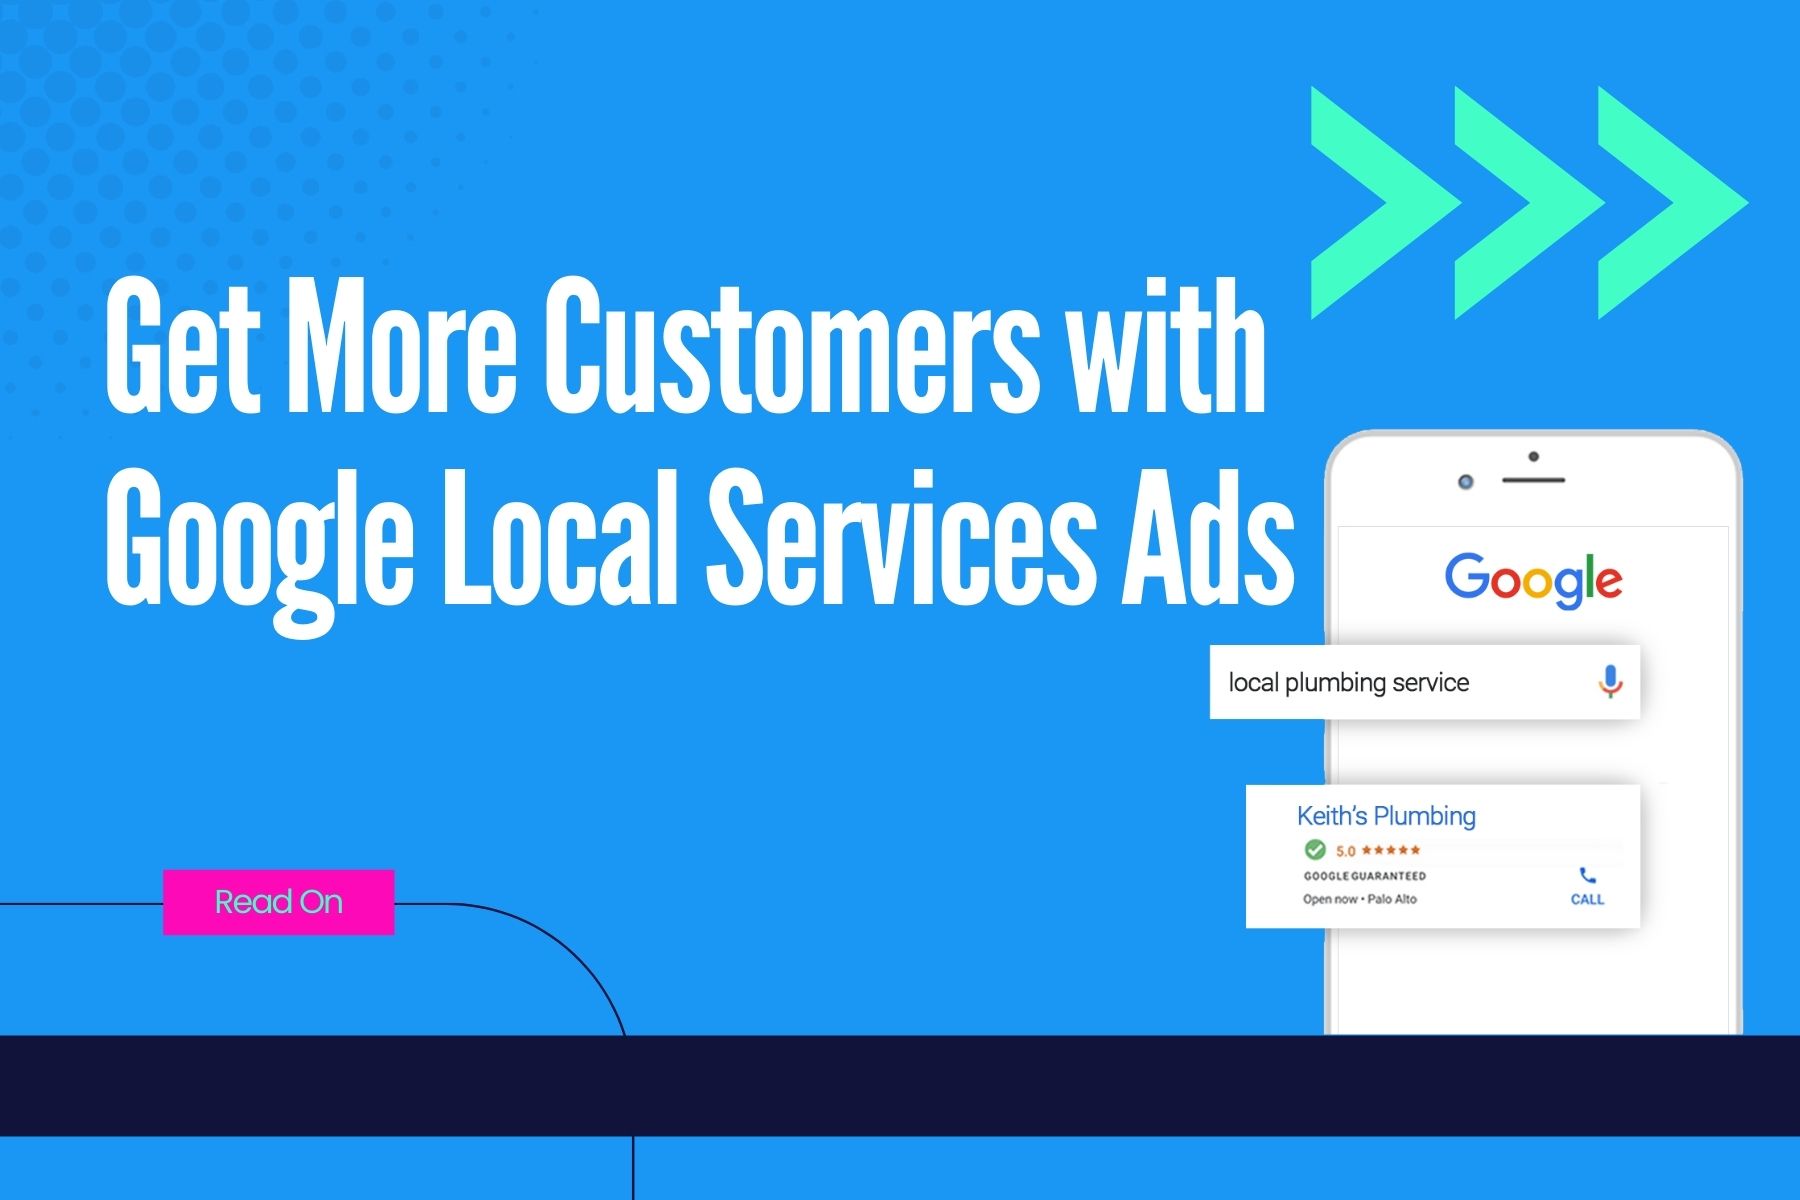 How Local Services Ads Can Help You Get More Customers